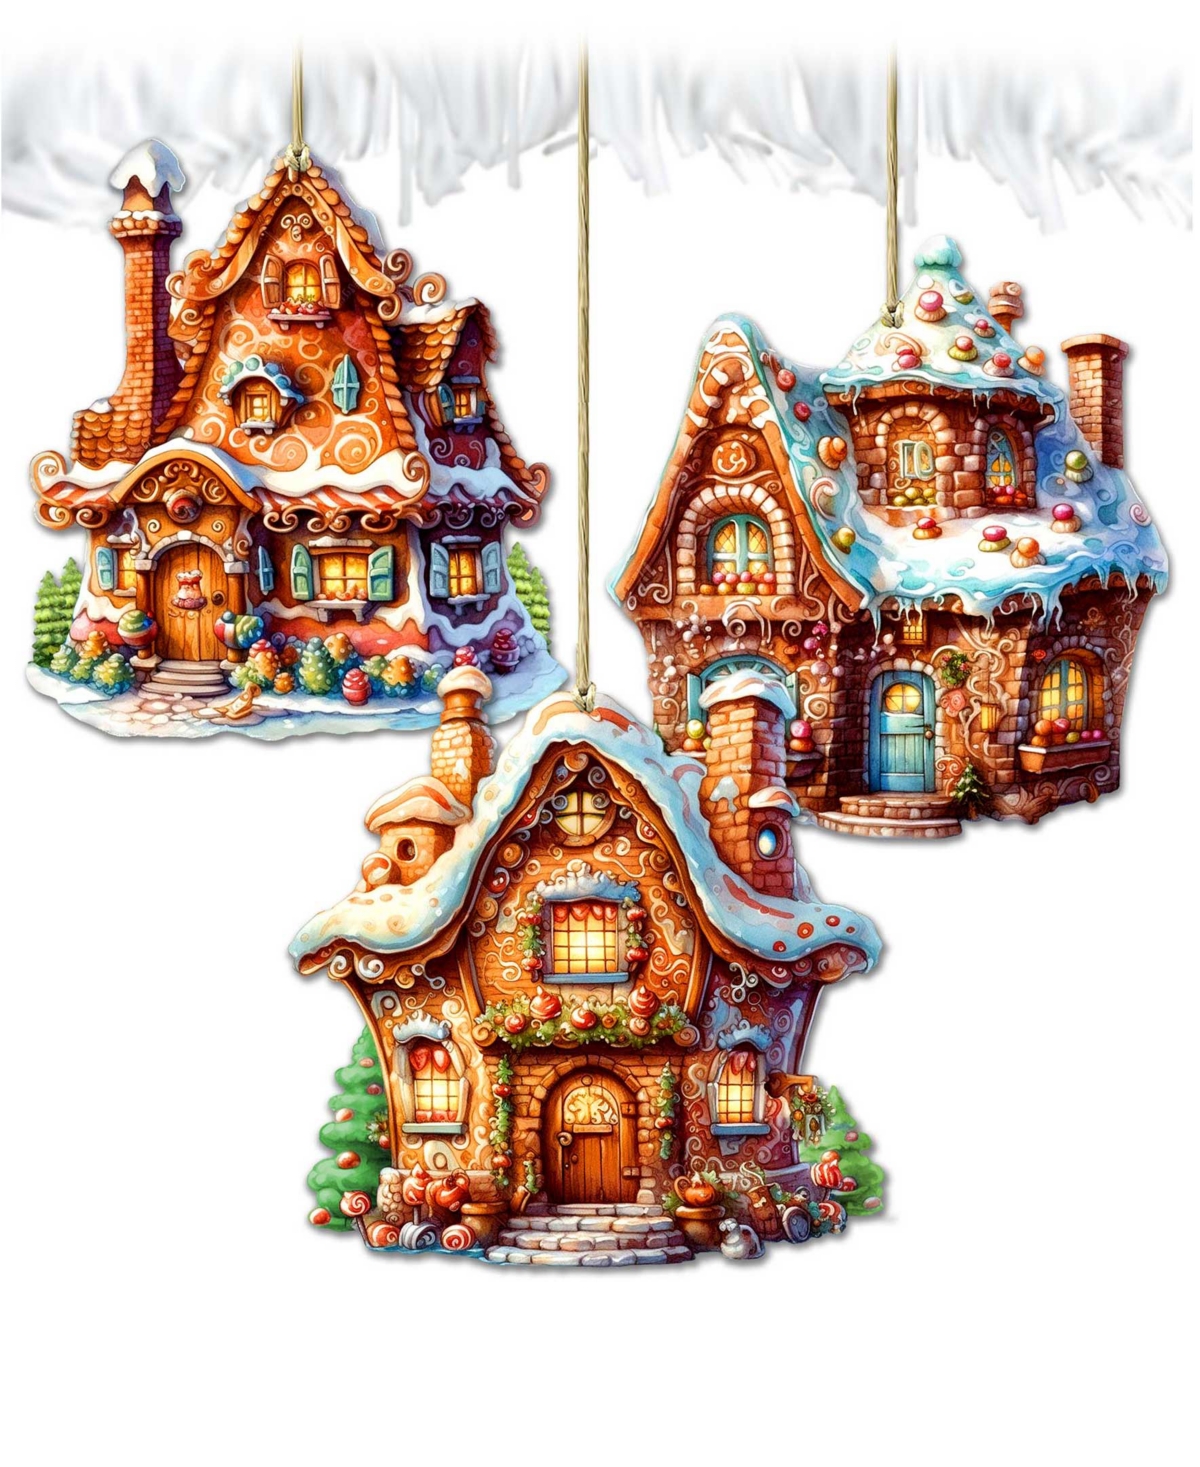 Designocracy Fairy Tale Houses Christmas Wooden Ornaments Holiday Decor Set Of 3 G. Debrekht In Multi Color